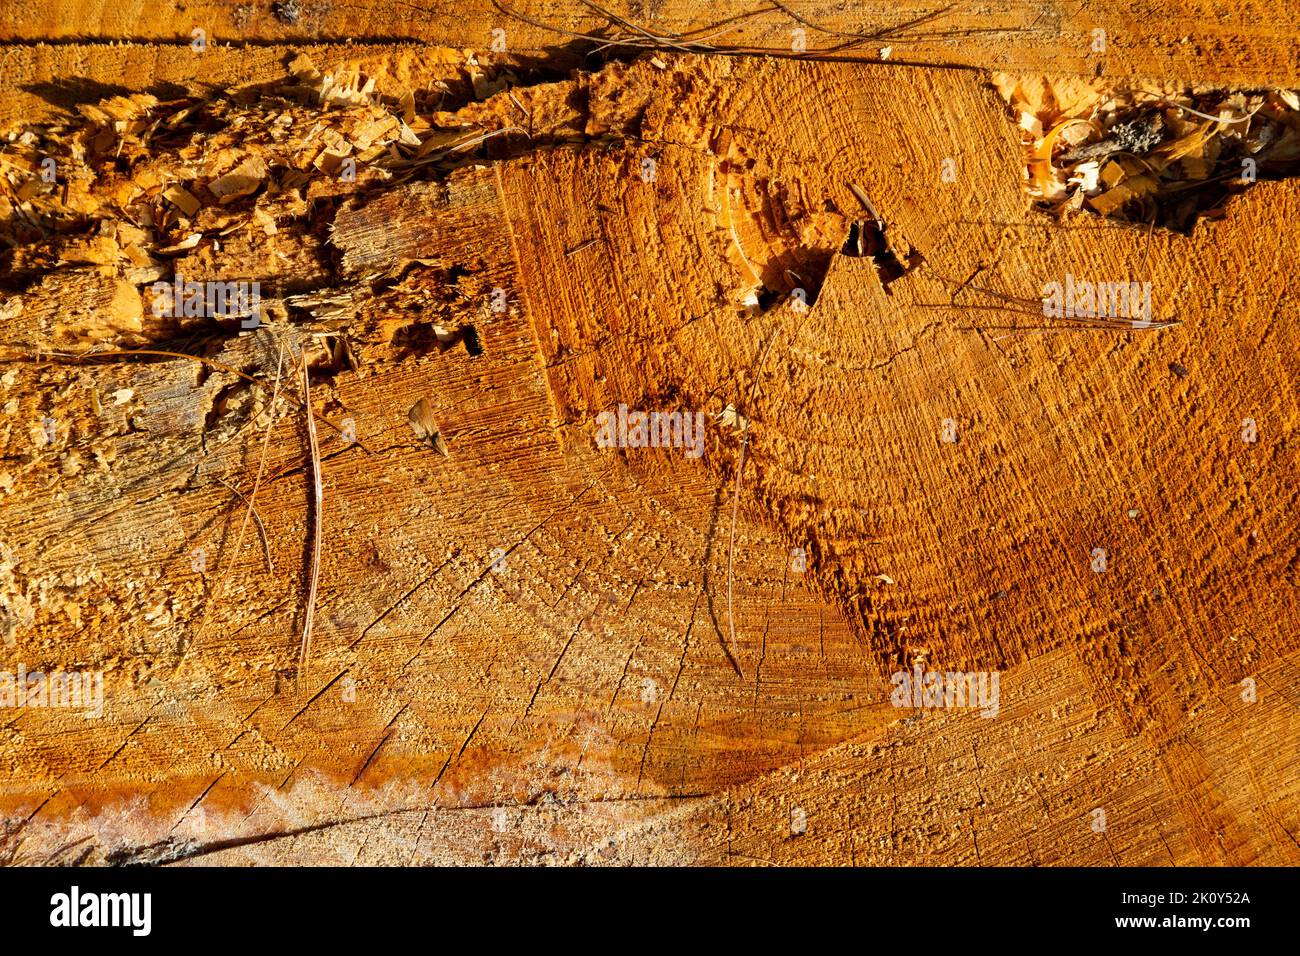 Overhead close view of a stump in the early morning light. Stock Photo